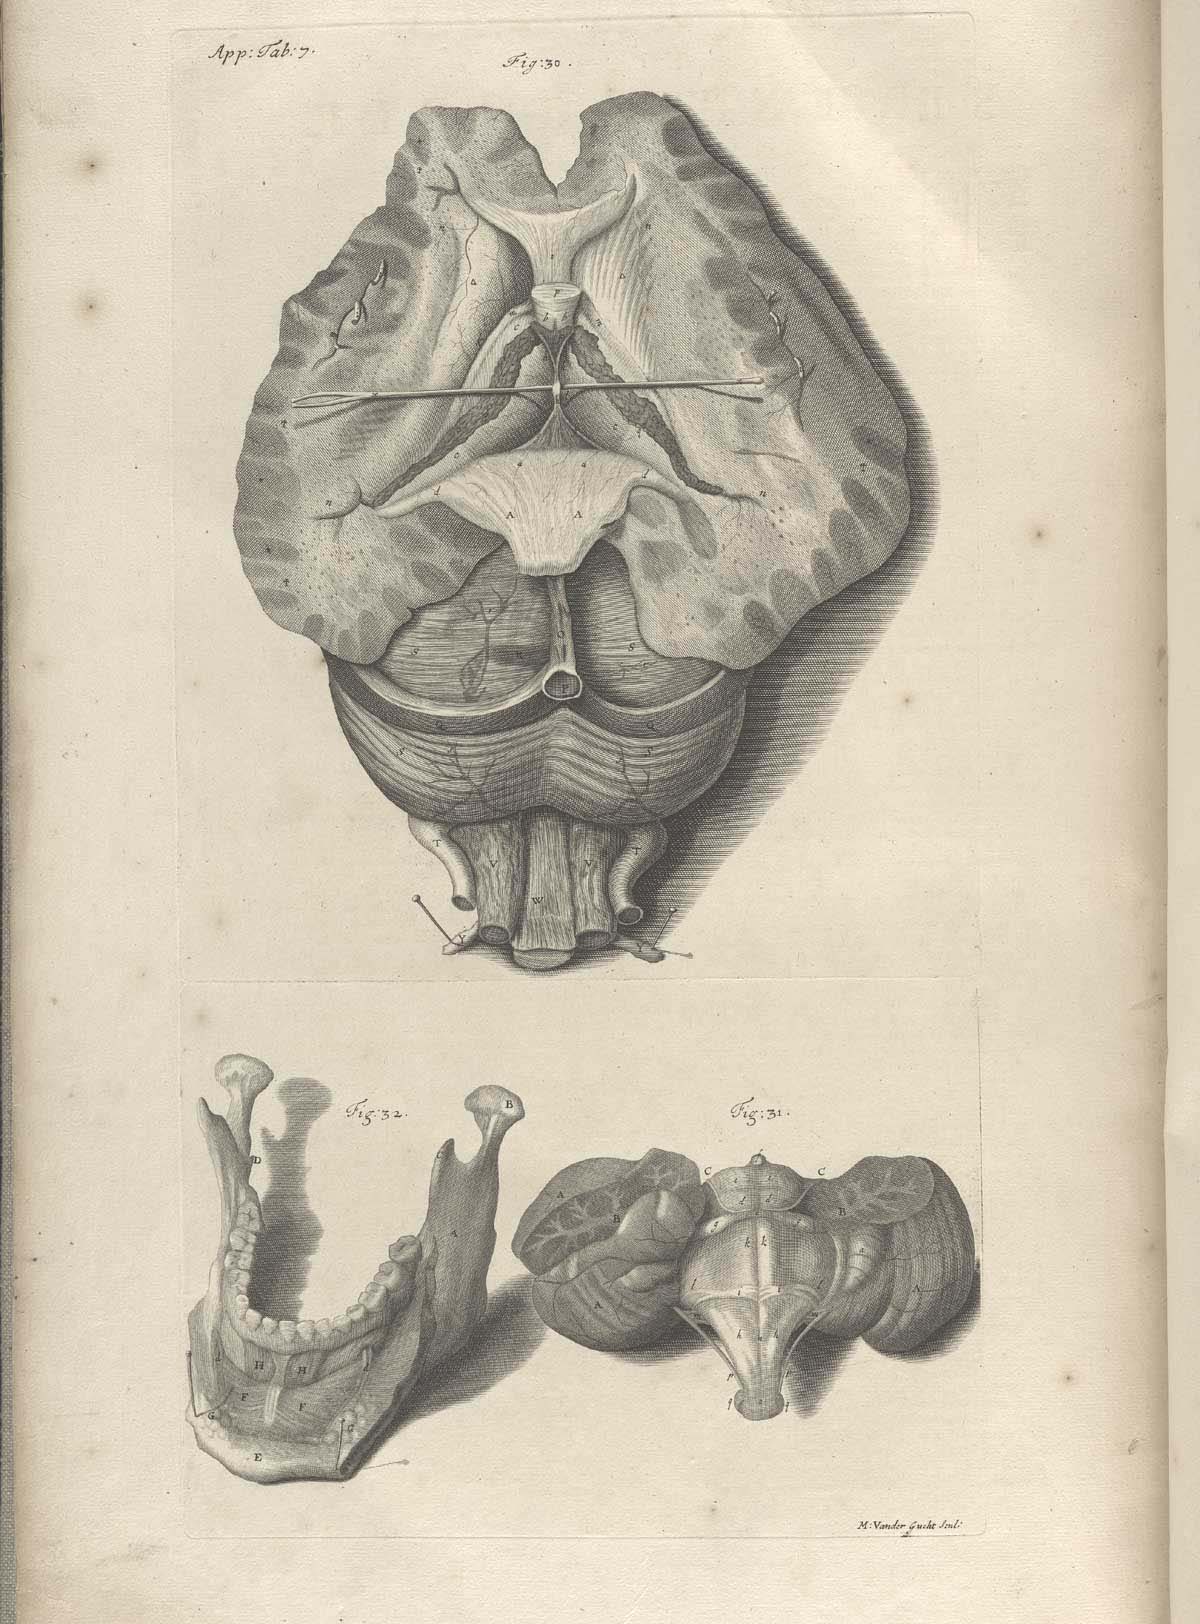 Engraving of the brain lying on its base with the top up facing the viewer with the lobes of the cerebellum spread open, all at the top of the page; at the bottom of the page at the left is the mandible with teeth; and at lower right a portion of the cerebellum; from William Cowper’s Anatomy of the humane bodies, NLM Call no.: WZ 250 C876a 1698.